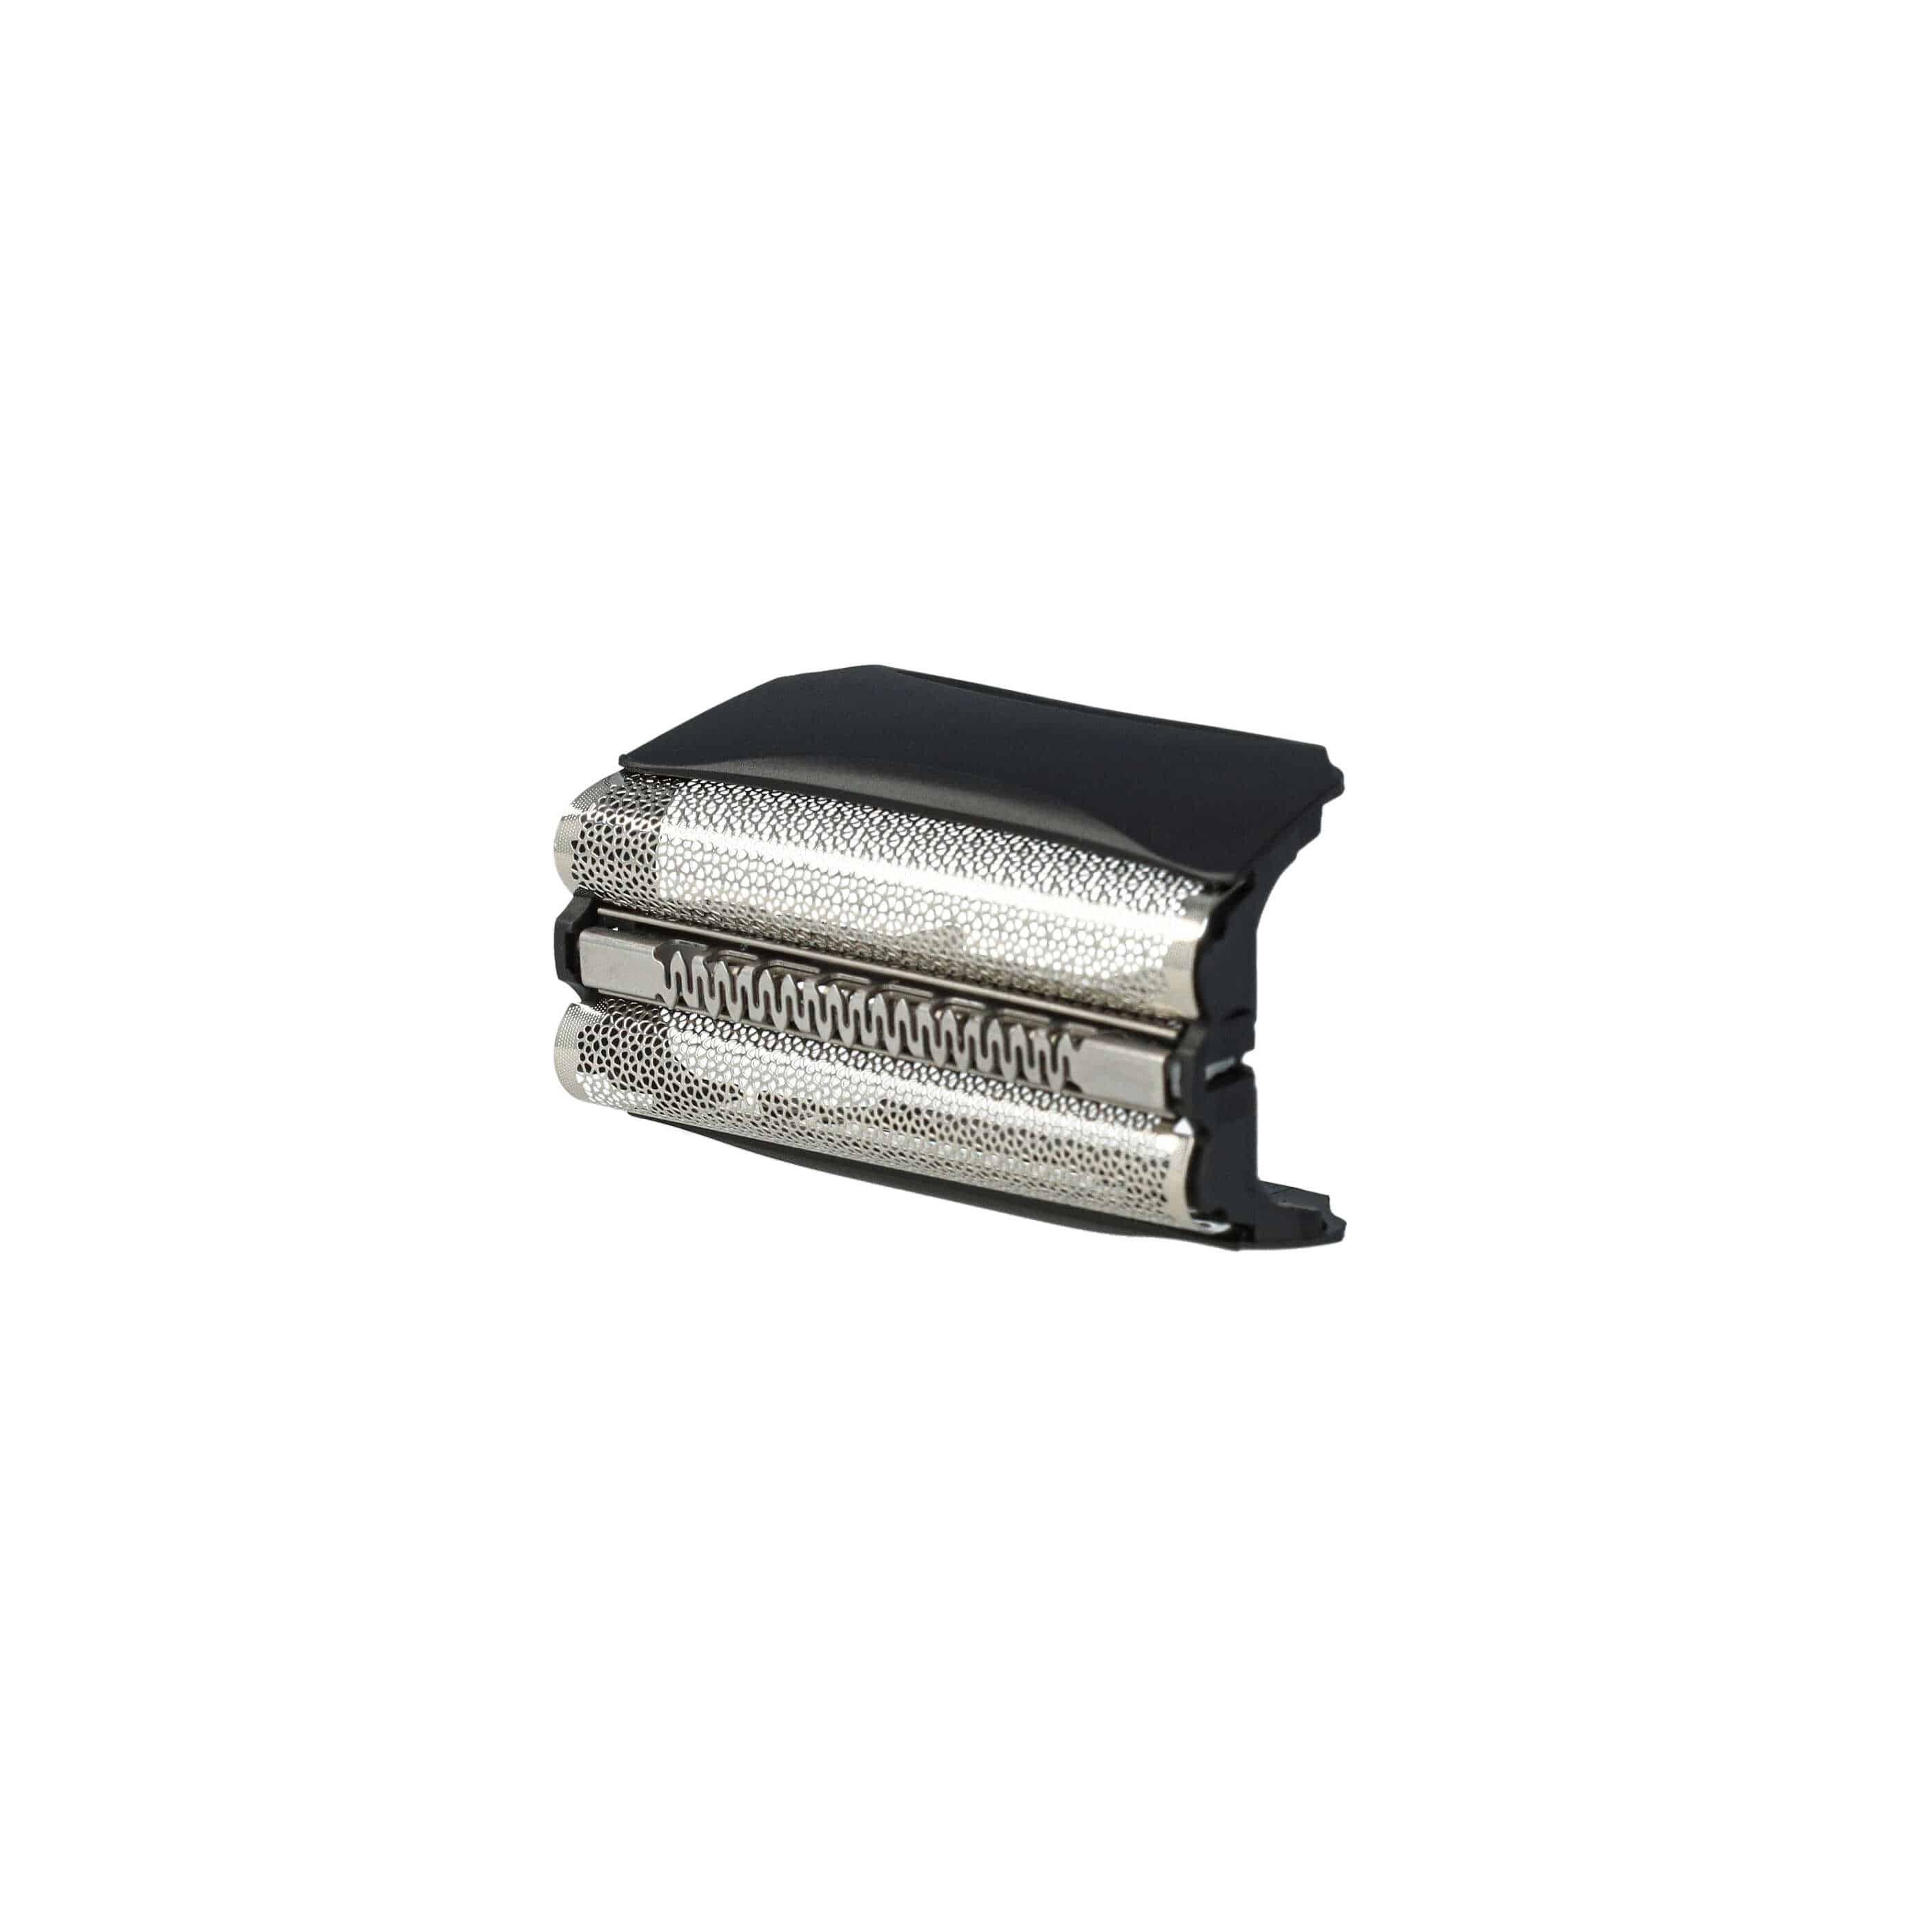 Combi Pack Shaver Part replaces Braun 51B, 51S for for Razor - Foil + Blades, Black/Silver